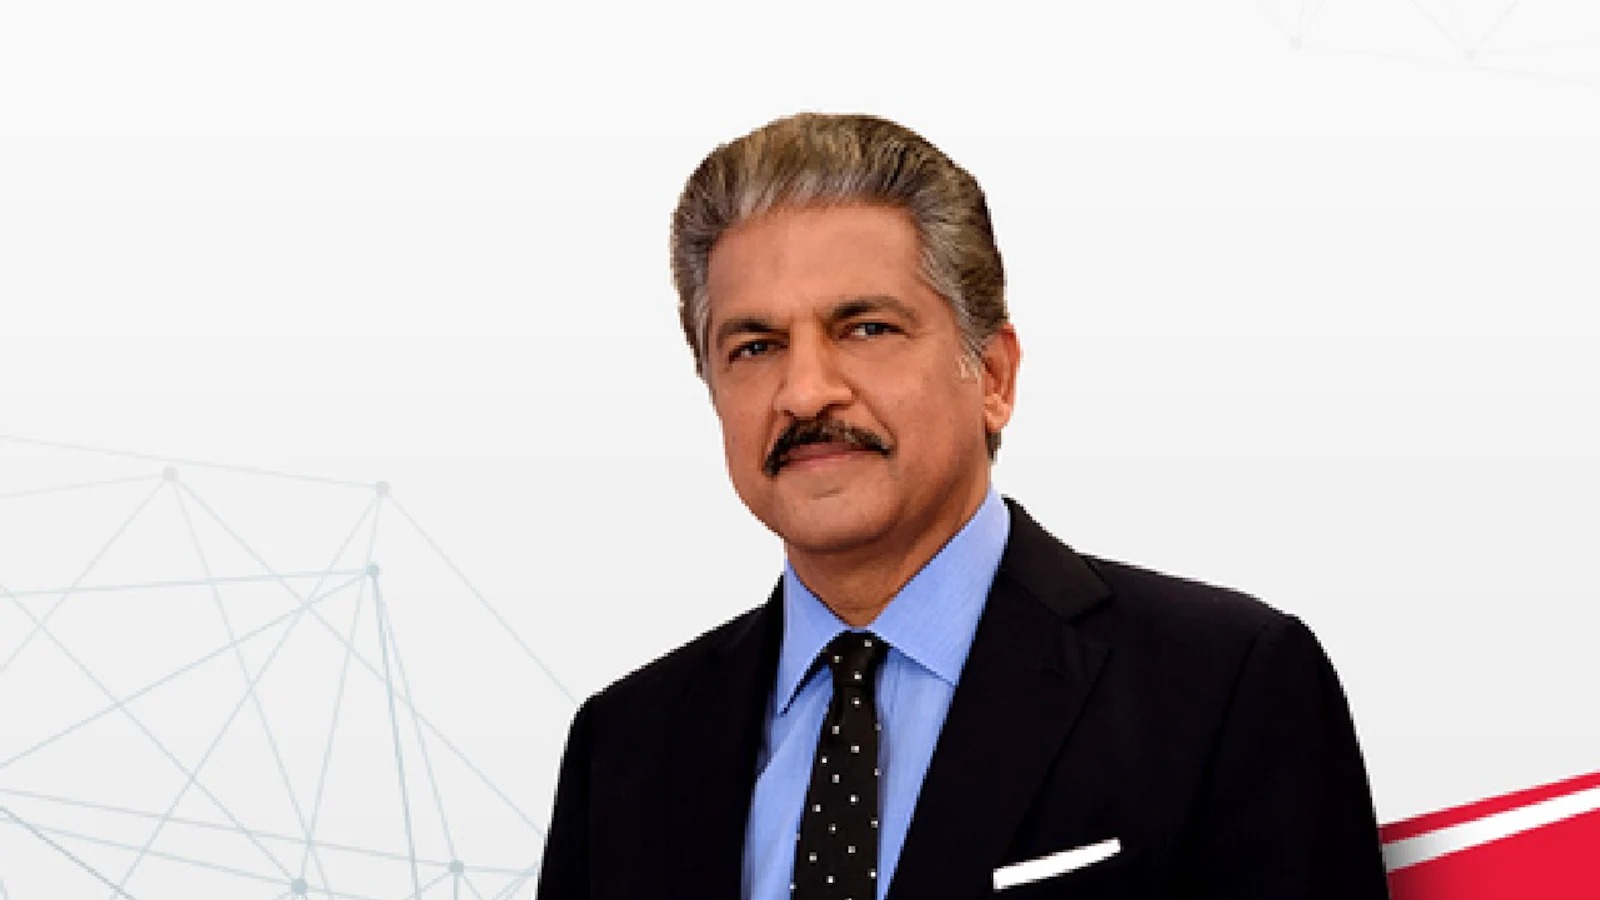 Anand Mahindra shares video of man playing music while selling corn